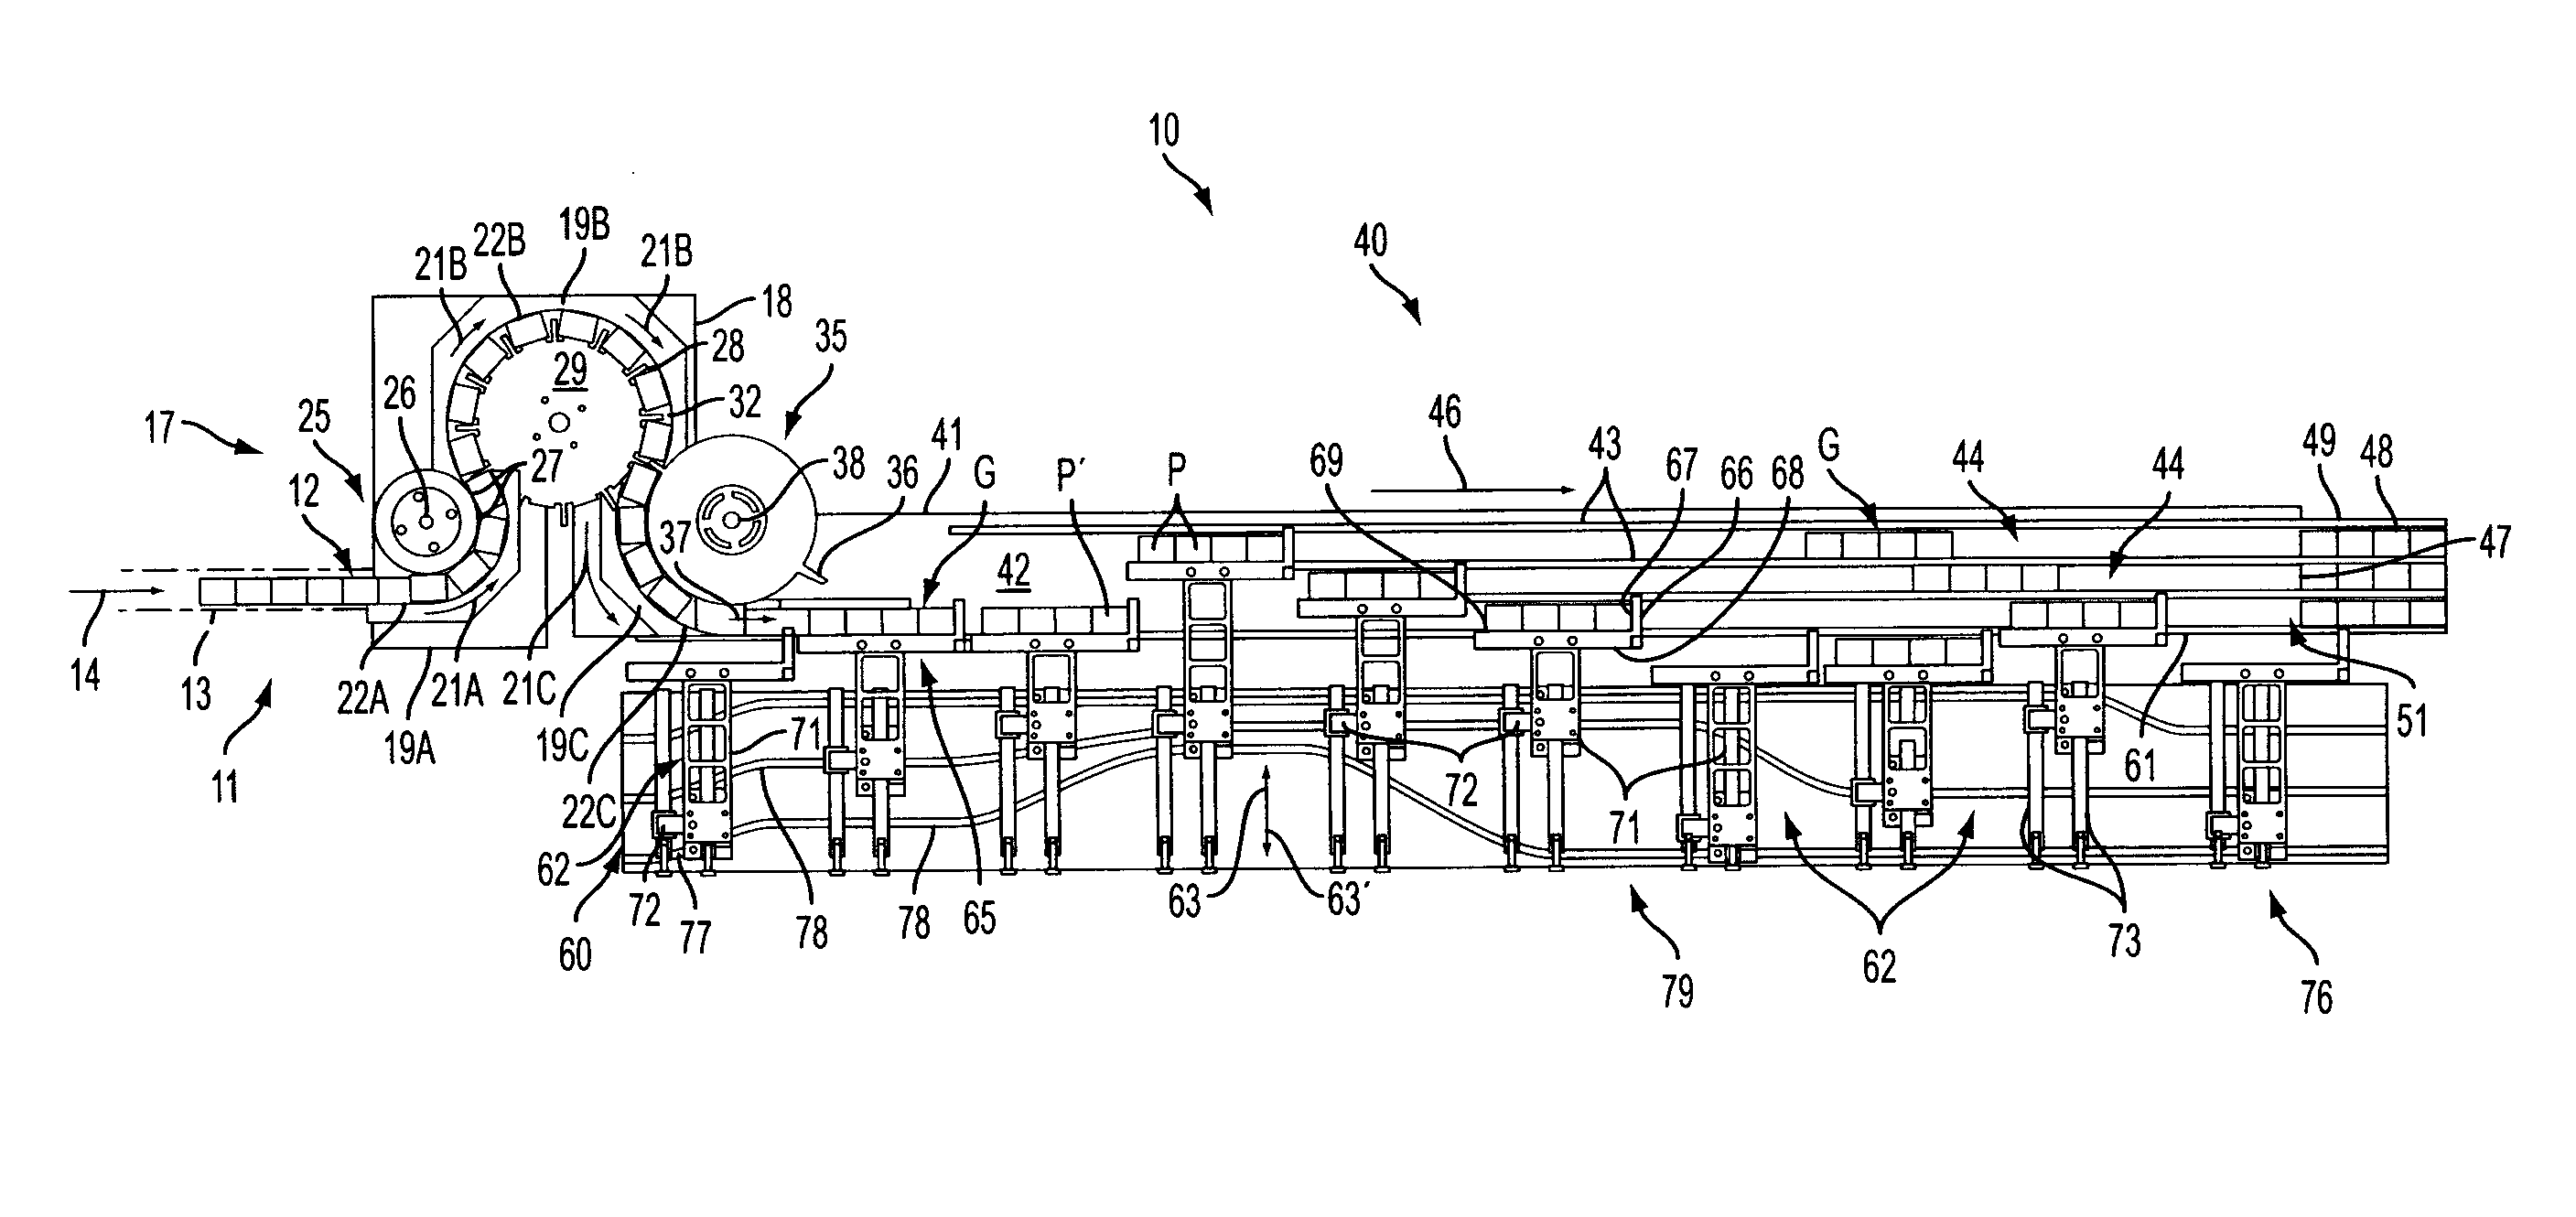 Continuous motion product selection and grouping system